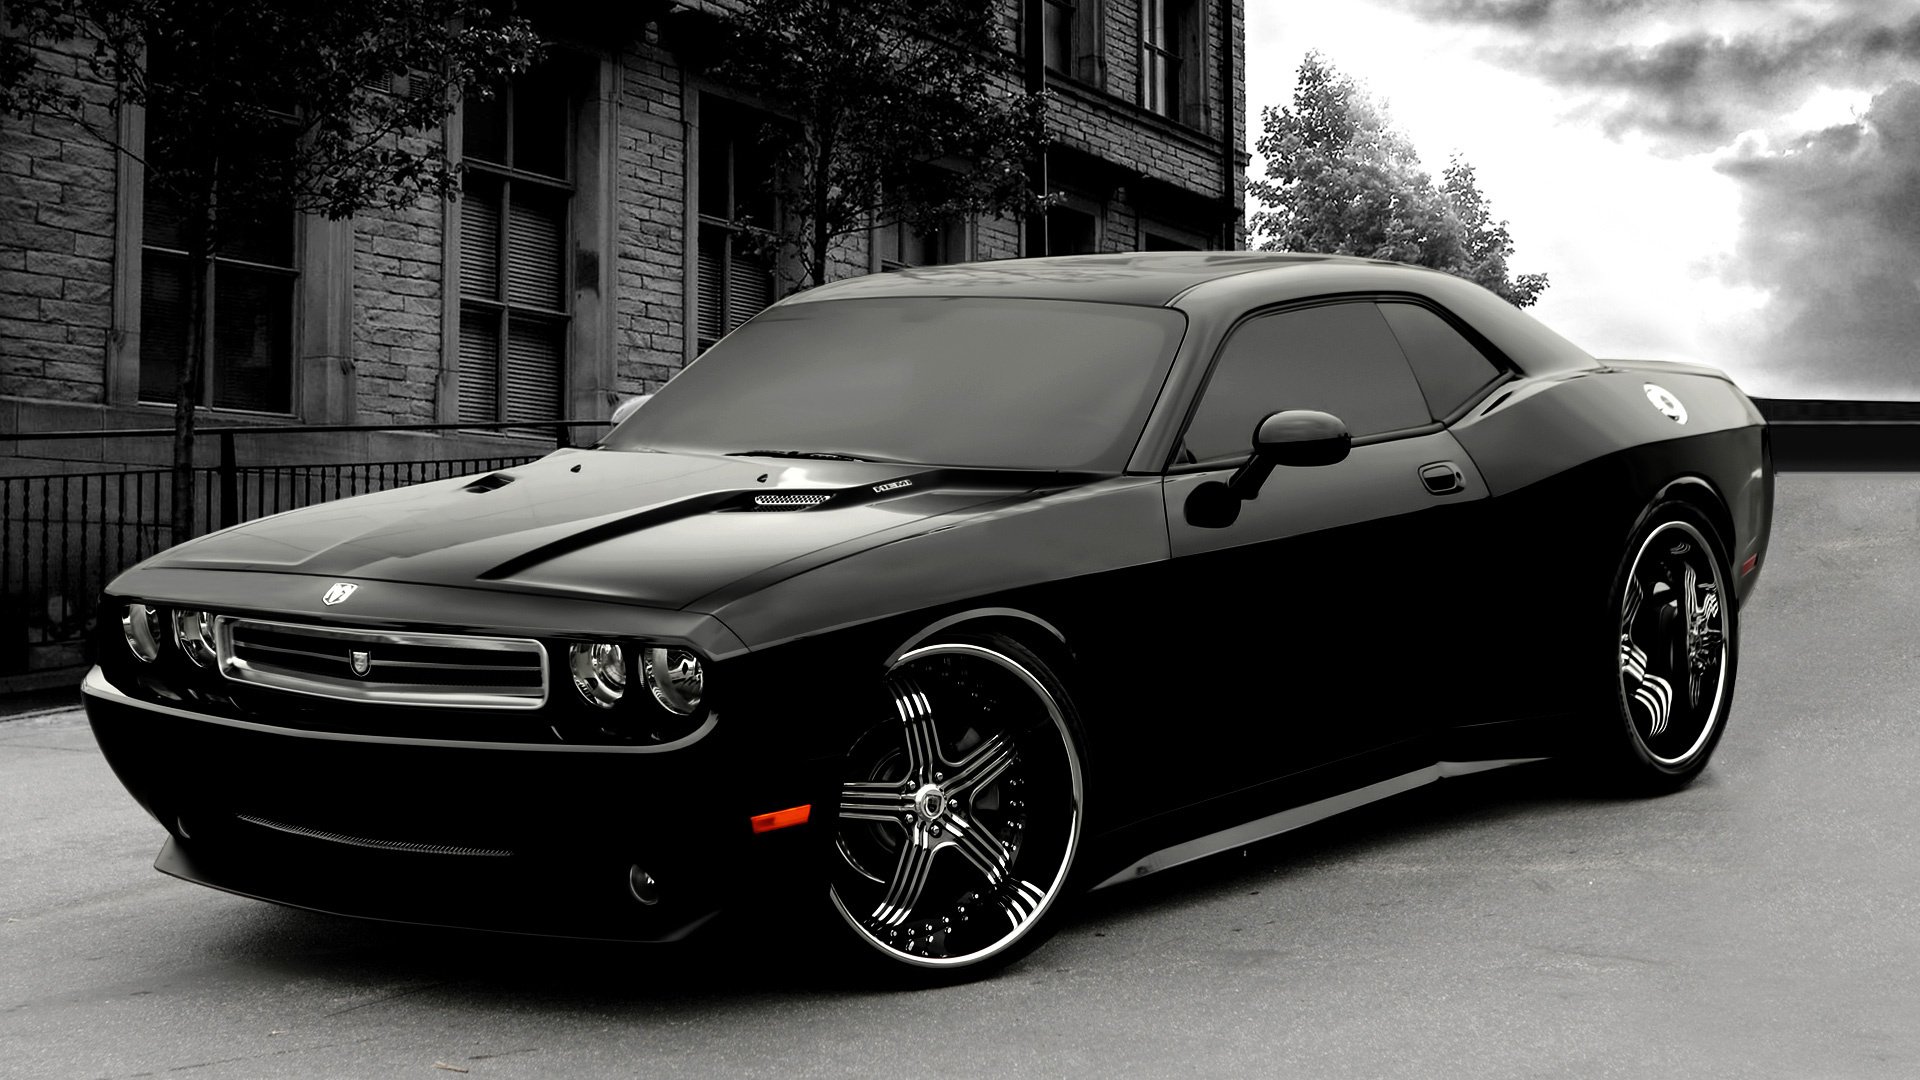 150 Dodge Challenger Hd Wallpapers Background Images